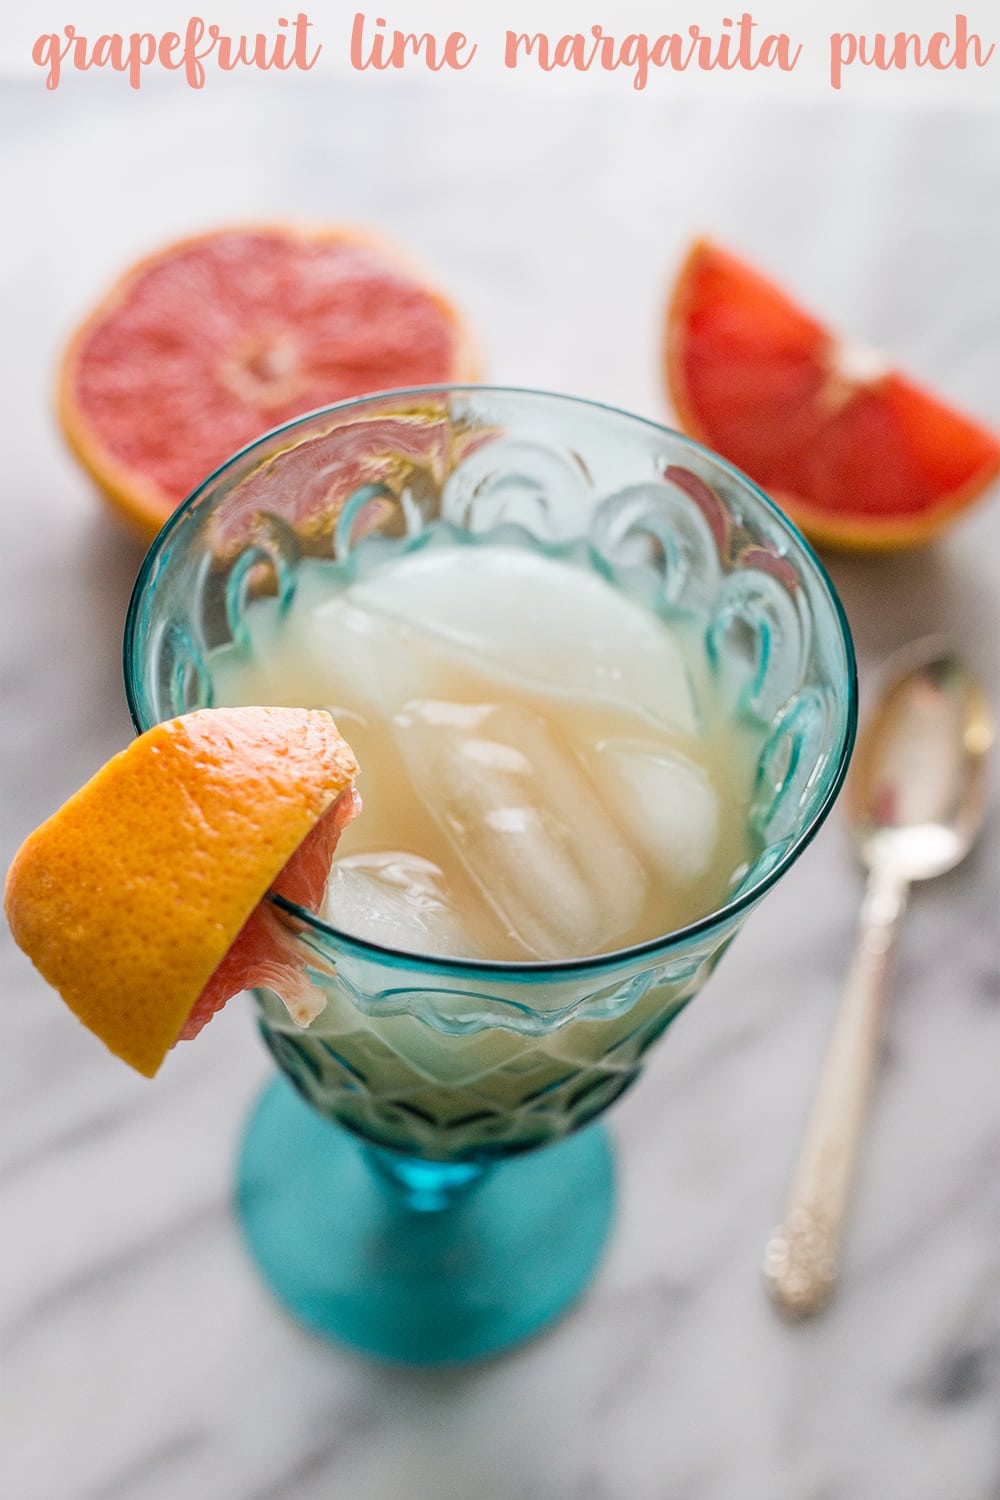 This grapefruit lime margarita punch is a delicious cocktail erfect for parties- mocktail recipe, too!